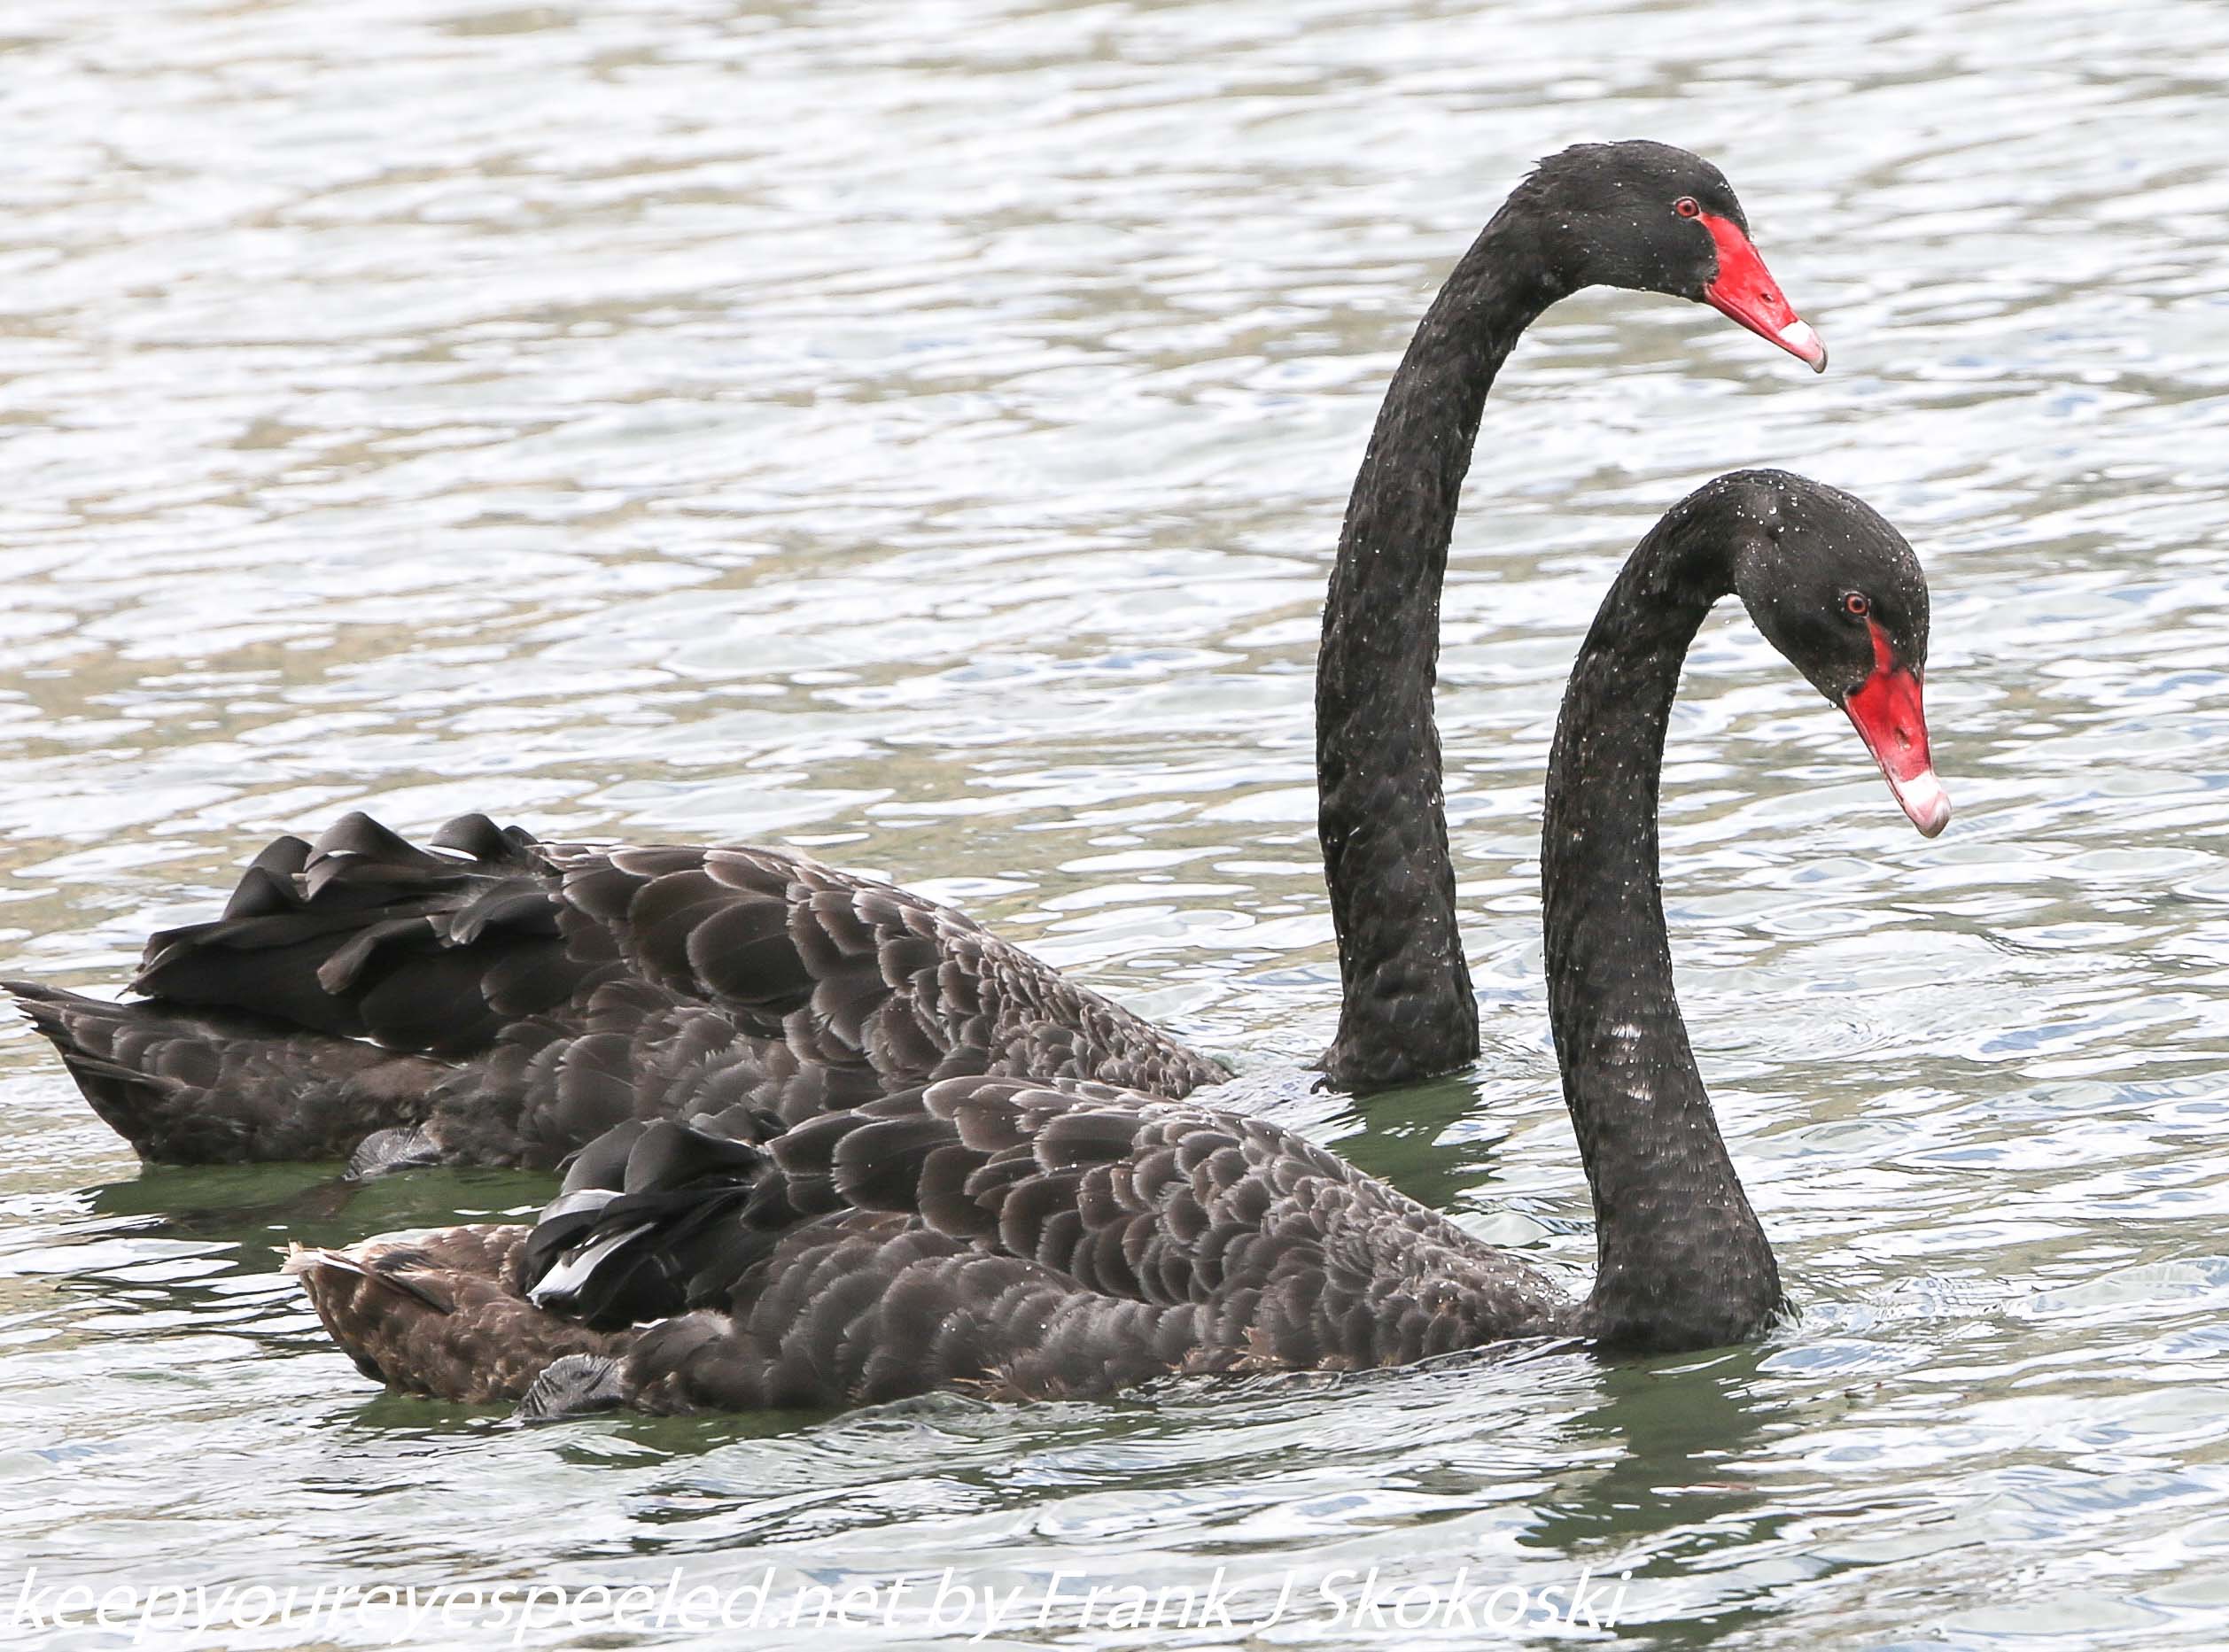 New-Zealand-Day-Seven-Glenorchy-black-swan-4-of-12